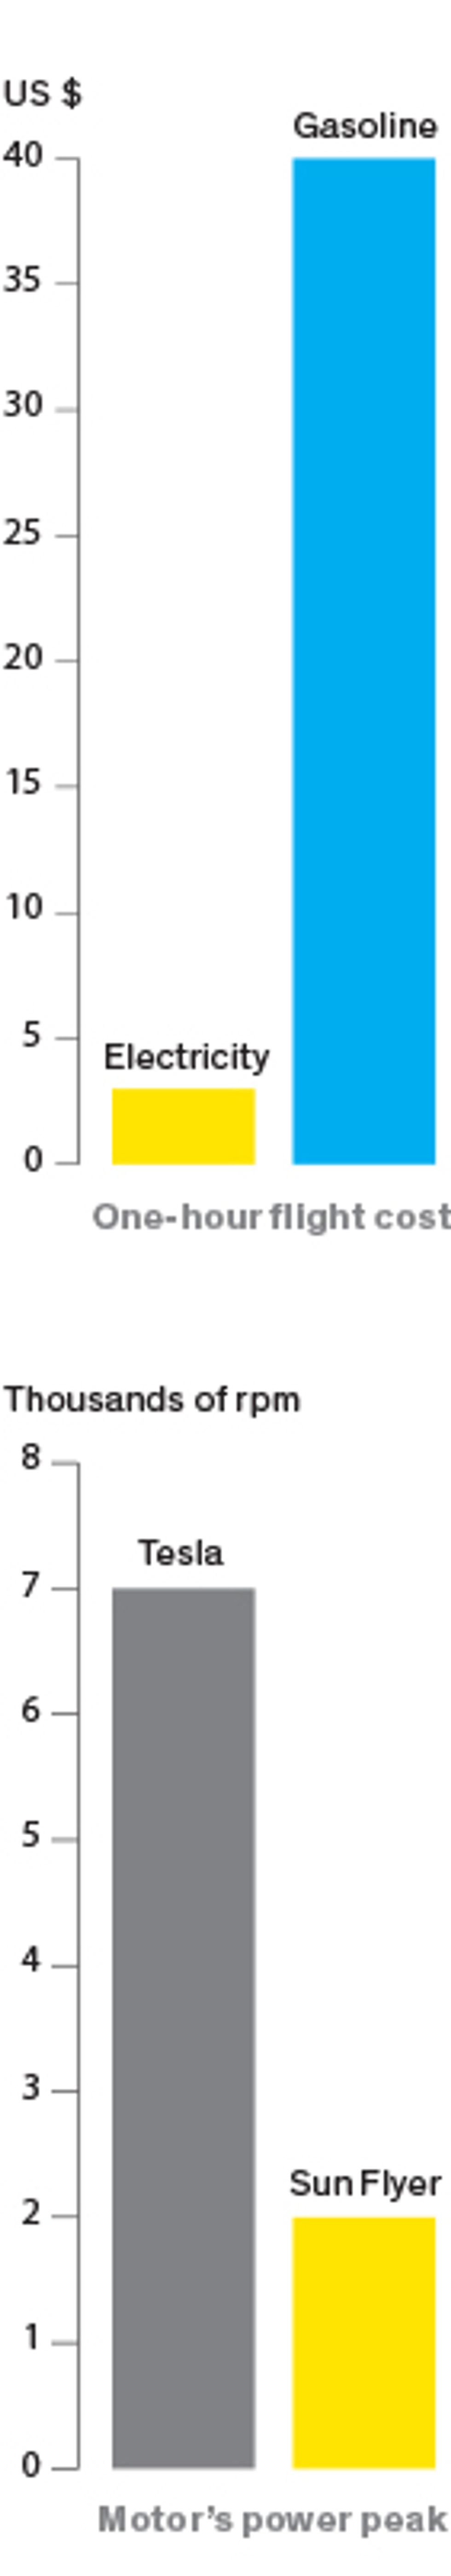 Two chart comparisons: one hour flight cost for electricity vs. gas; and motor's power peak for Tesla vs. Sun Flyer